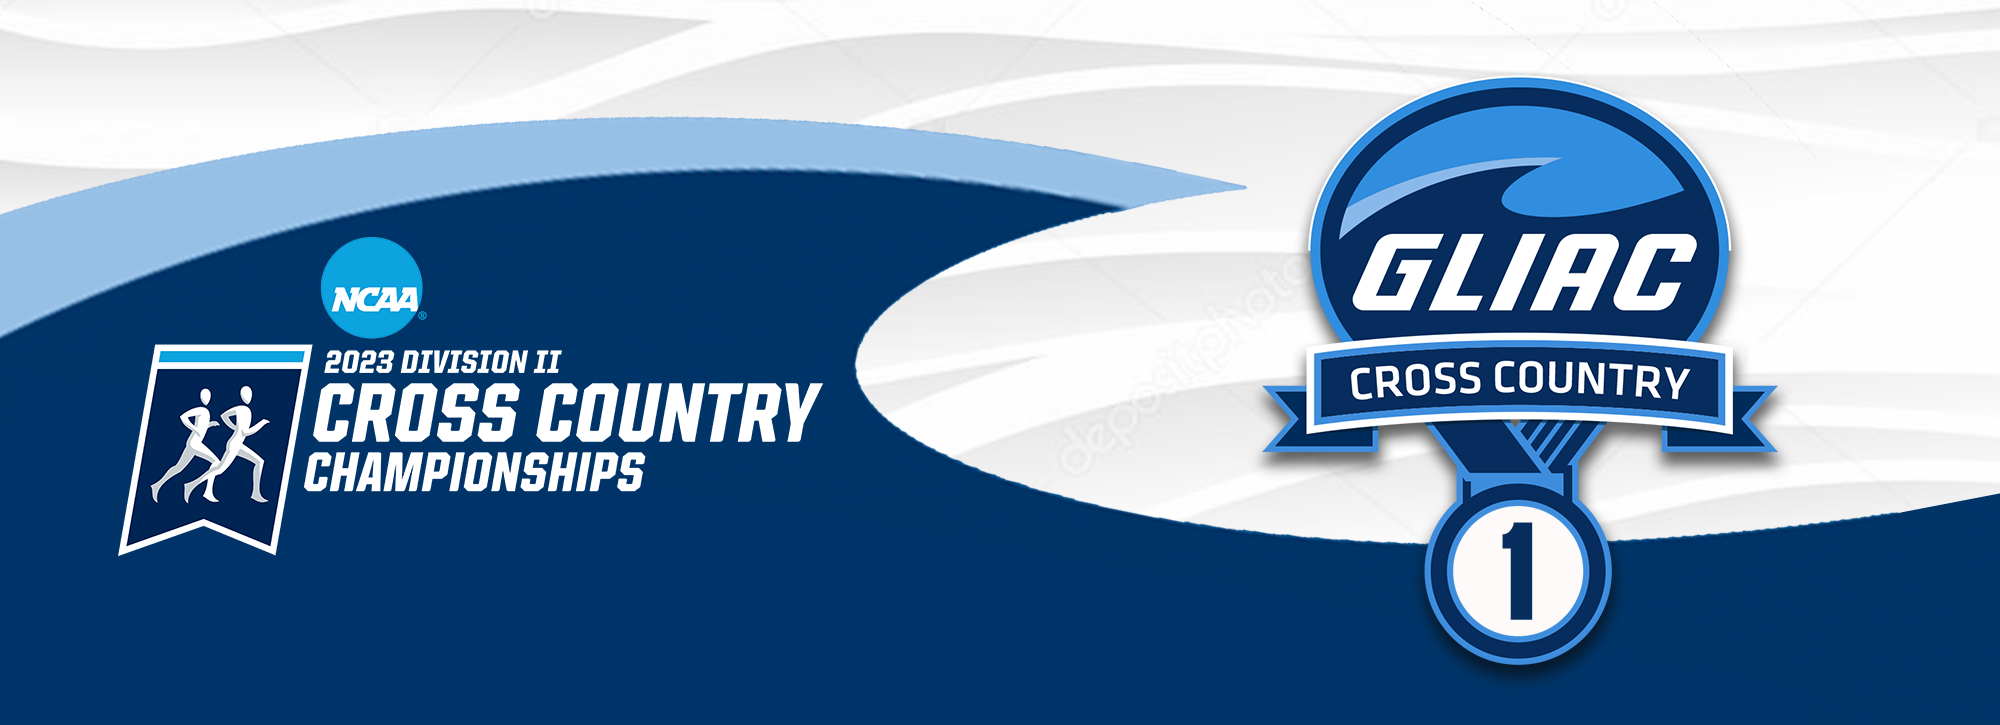 GLIAC teams and Individuals headed to NCAA Cross Country Championships